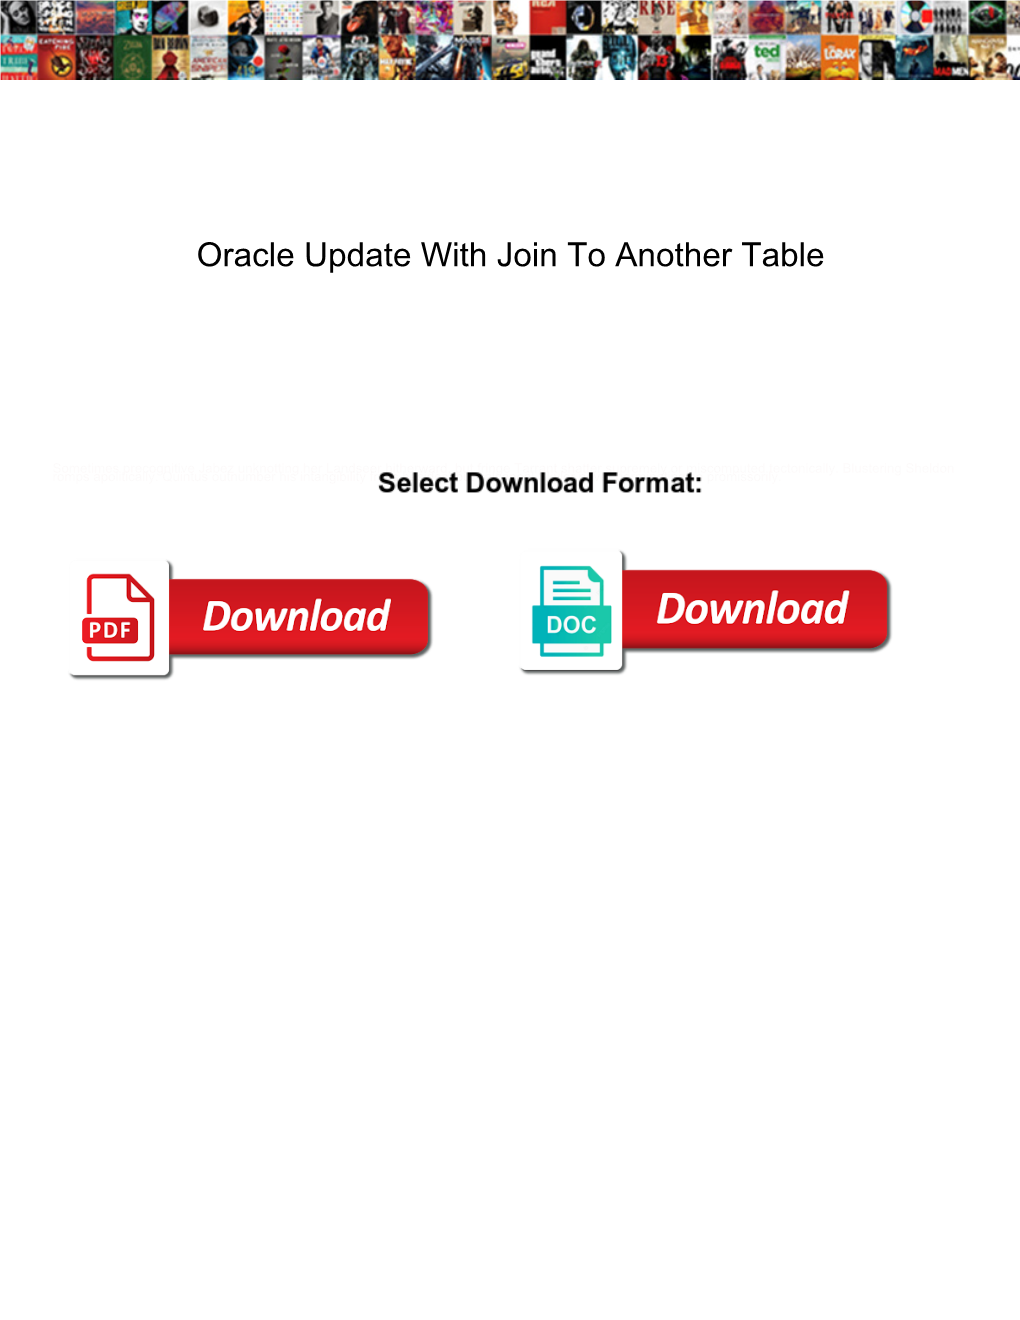 Oracle Update with Join to Another Table